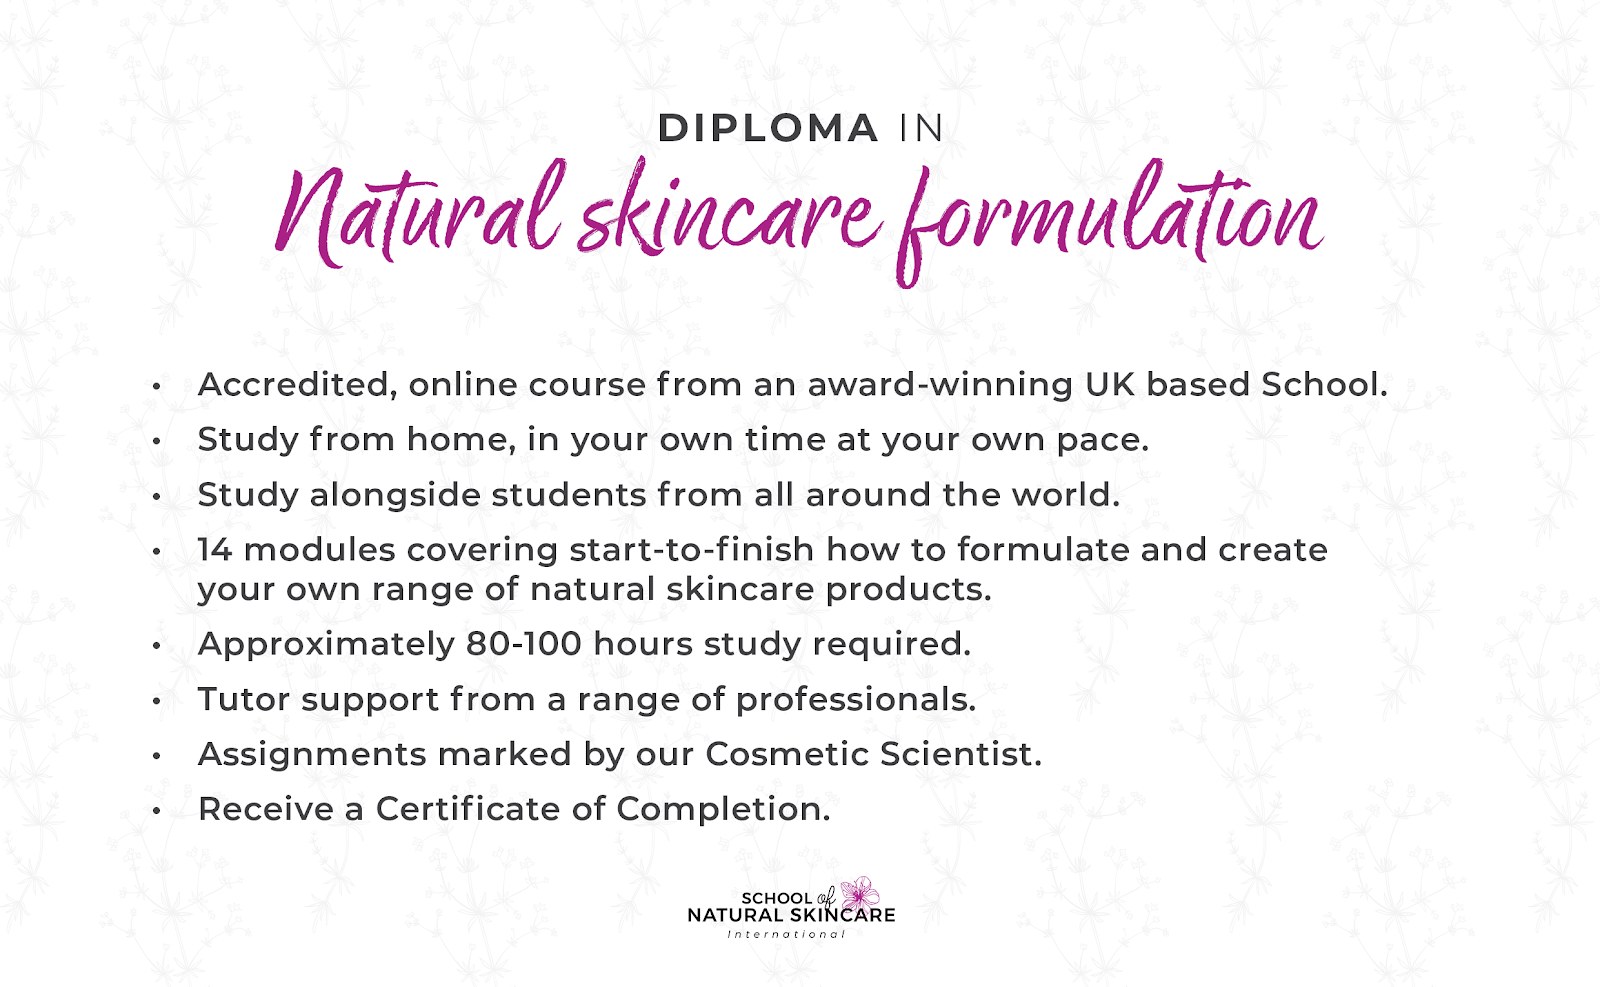 Make Your Own Cosmetics - Our Diploma Course Isn’t Just for Businesses! Skincare Formulation 